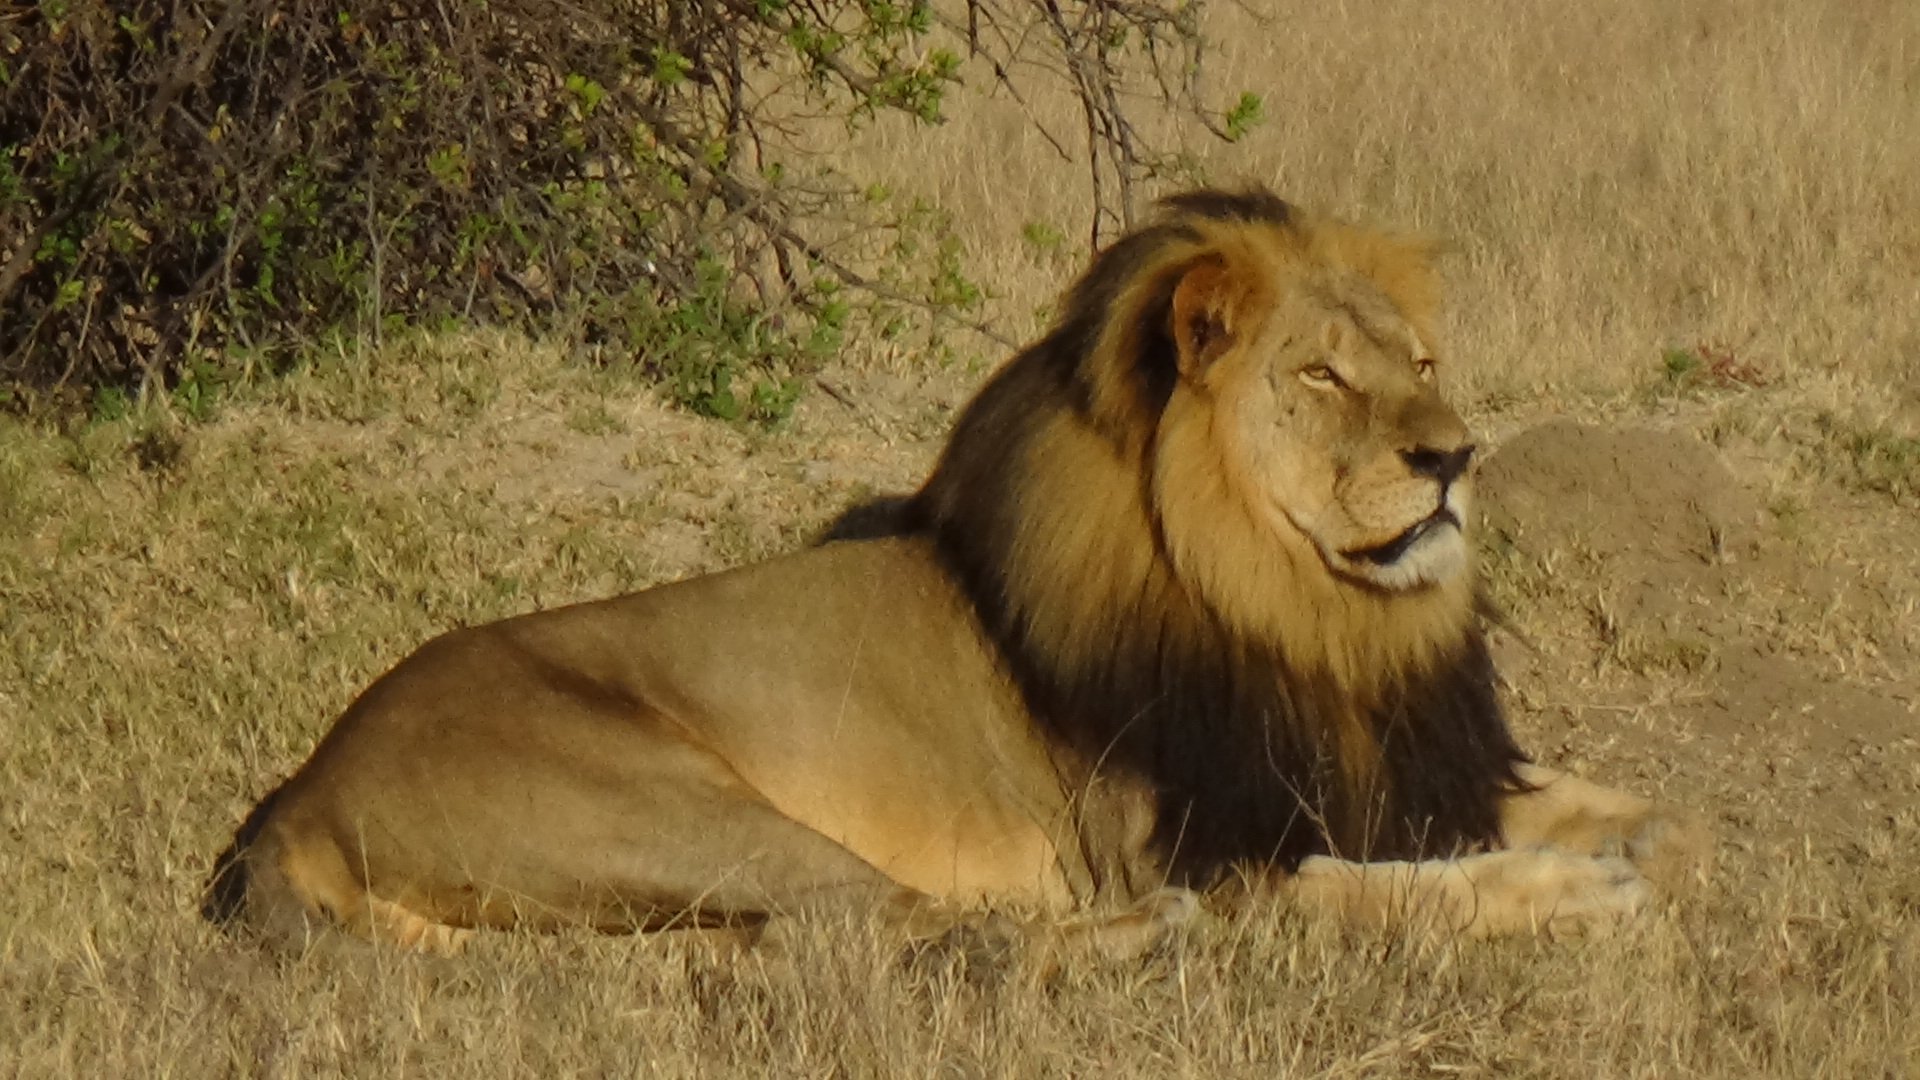 An American man is being sought in connection with a case that has drawn international attention -- the killing of Cecil the lion -- Zimbabwean officials said Tuesday, July 28, 2015. The man suspected in Cecil's death is Walter James Palmer of Eden Prairie, Minnesota, according to Johnny Rodrigues, head of the Zimbabwe Conservation Task Force.